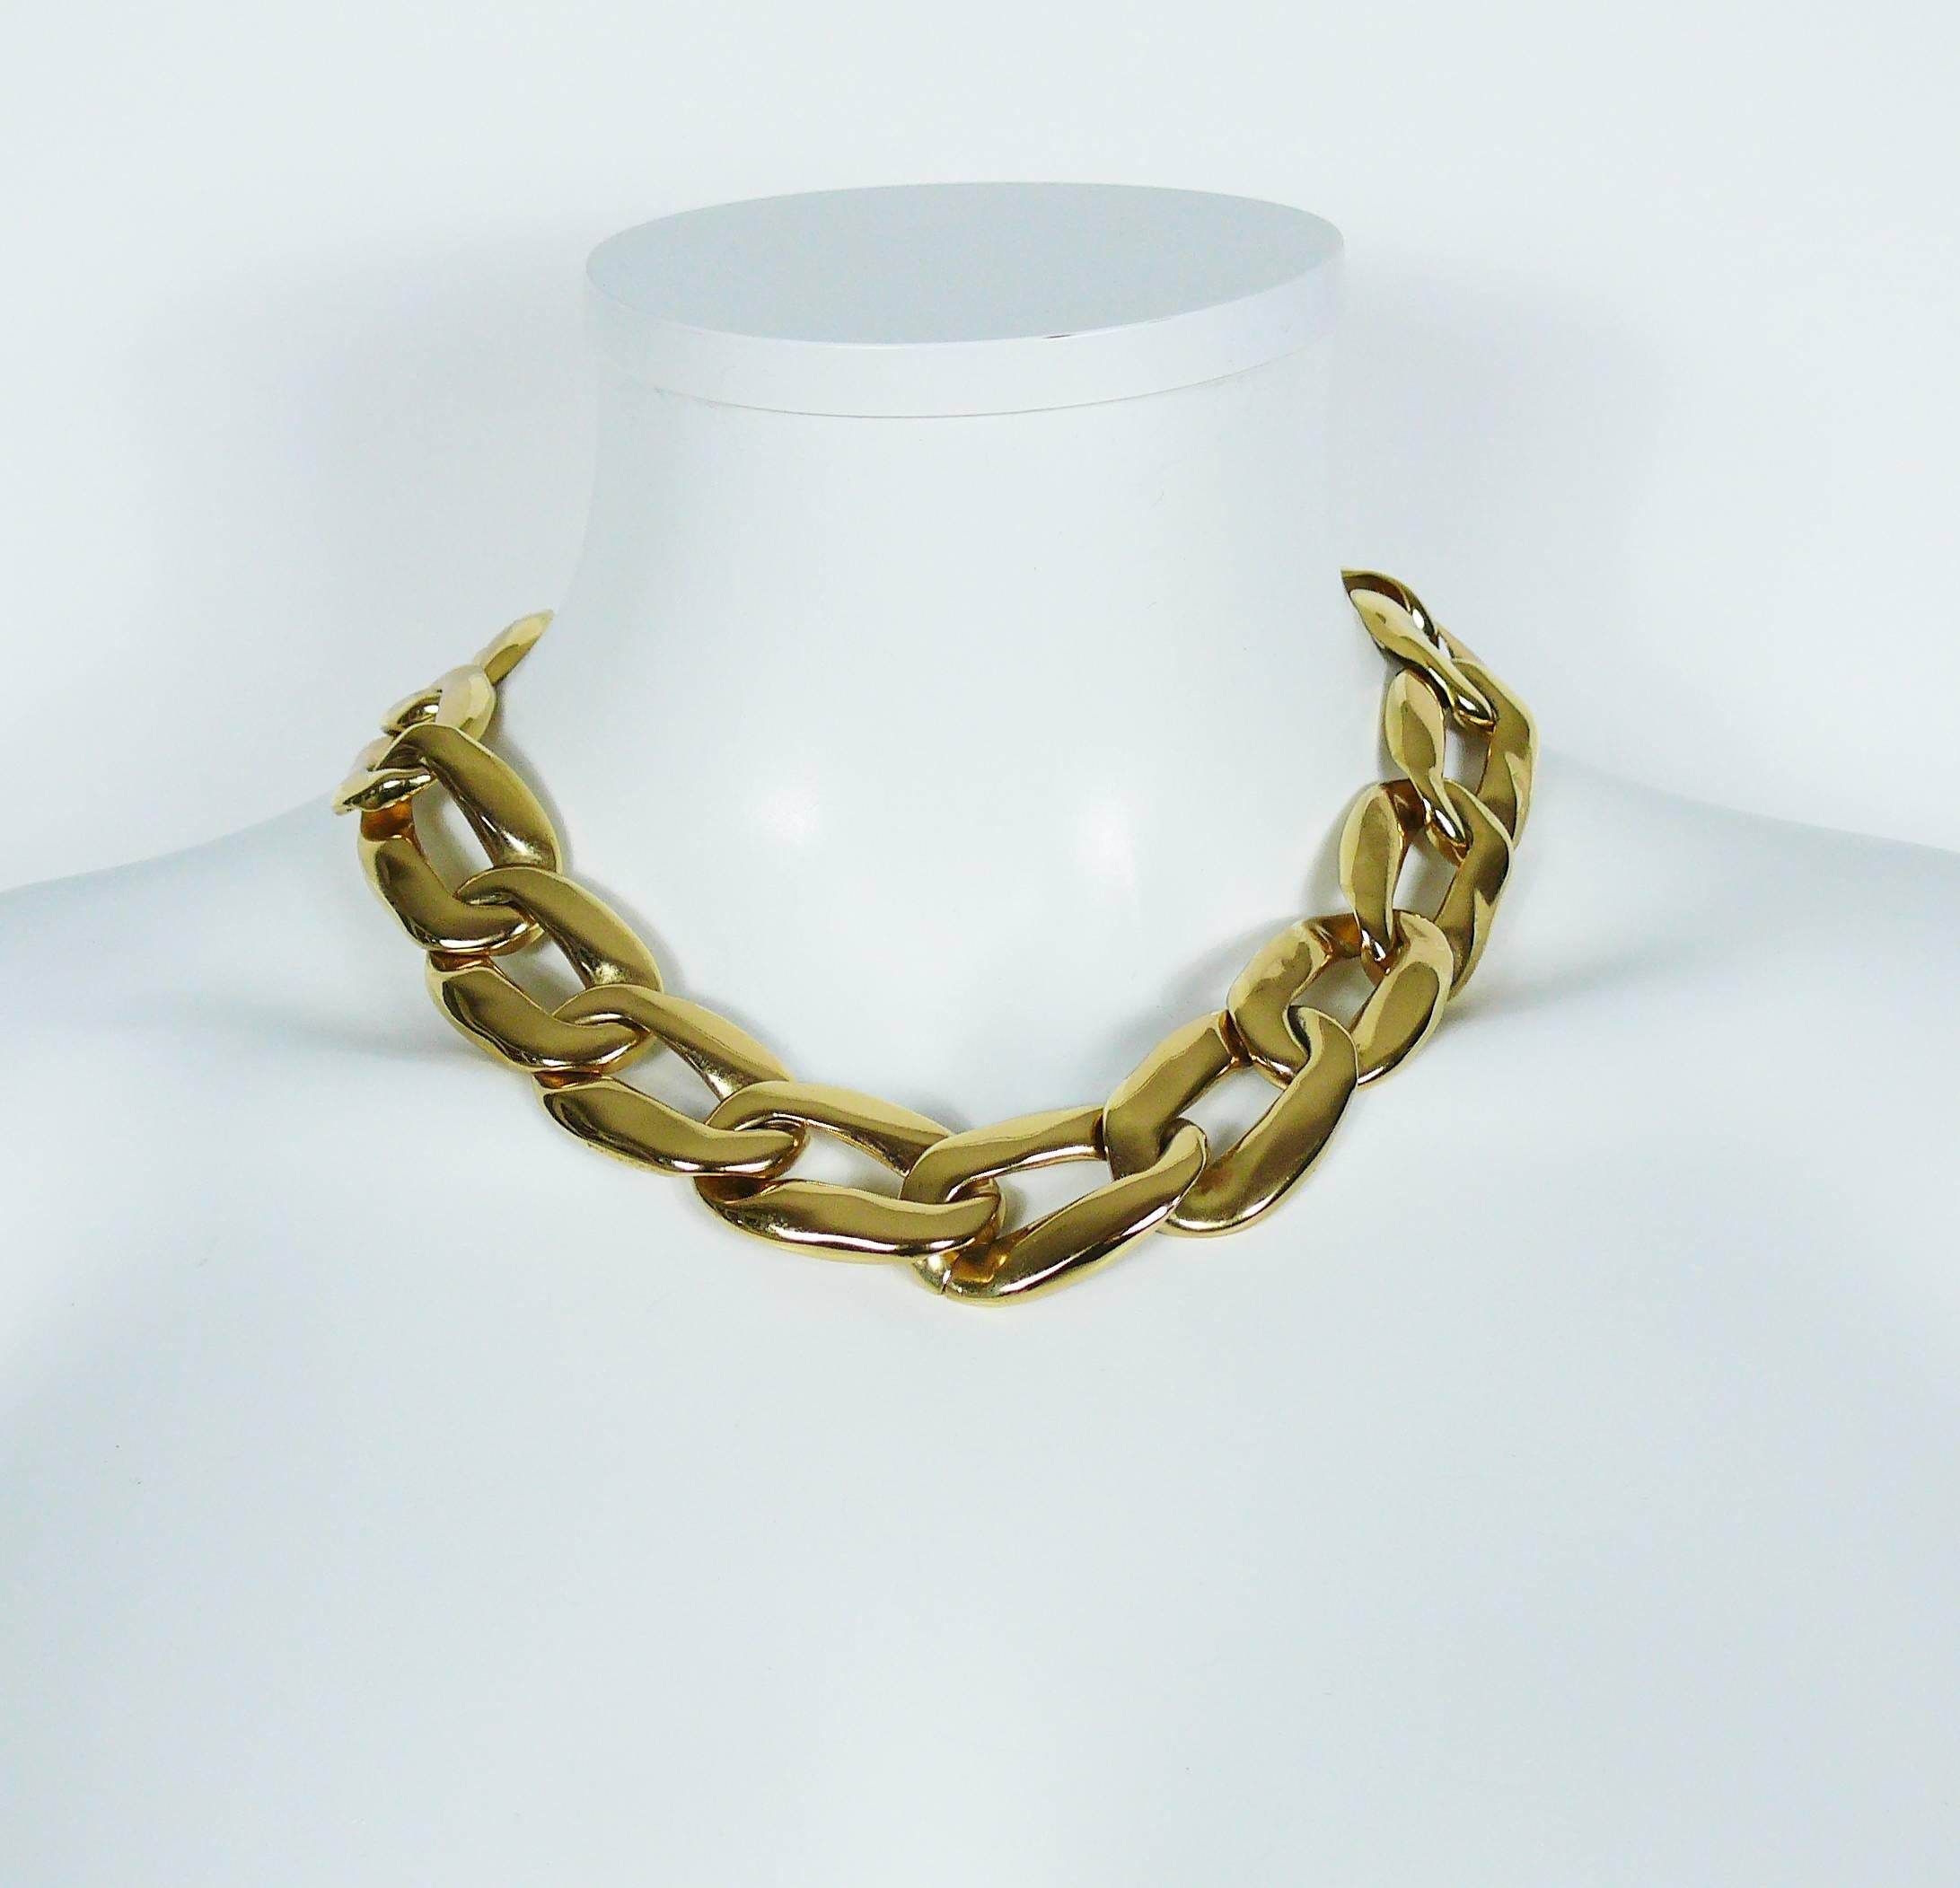 YVES SAINT LAURENT vintage classic chunky gold toned curb necklace.

Hook clasp.
Adjustable length.

Marked YSL Made in France.

Indicative measurements : total length approx. 50 cm (19.69 inches) / adjustable length from approx. 46 cm (18.11